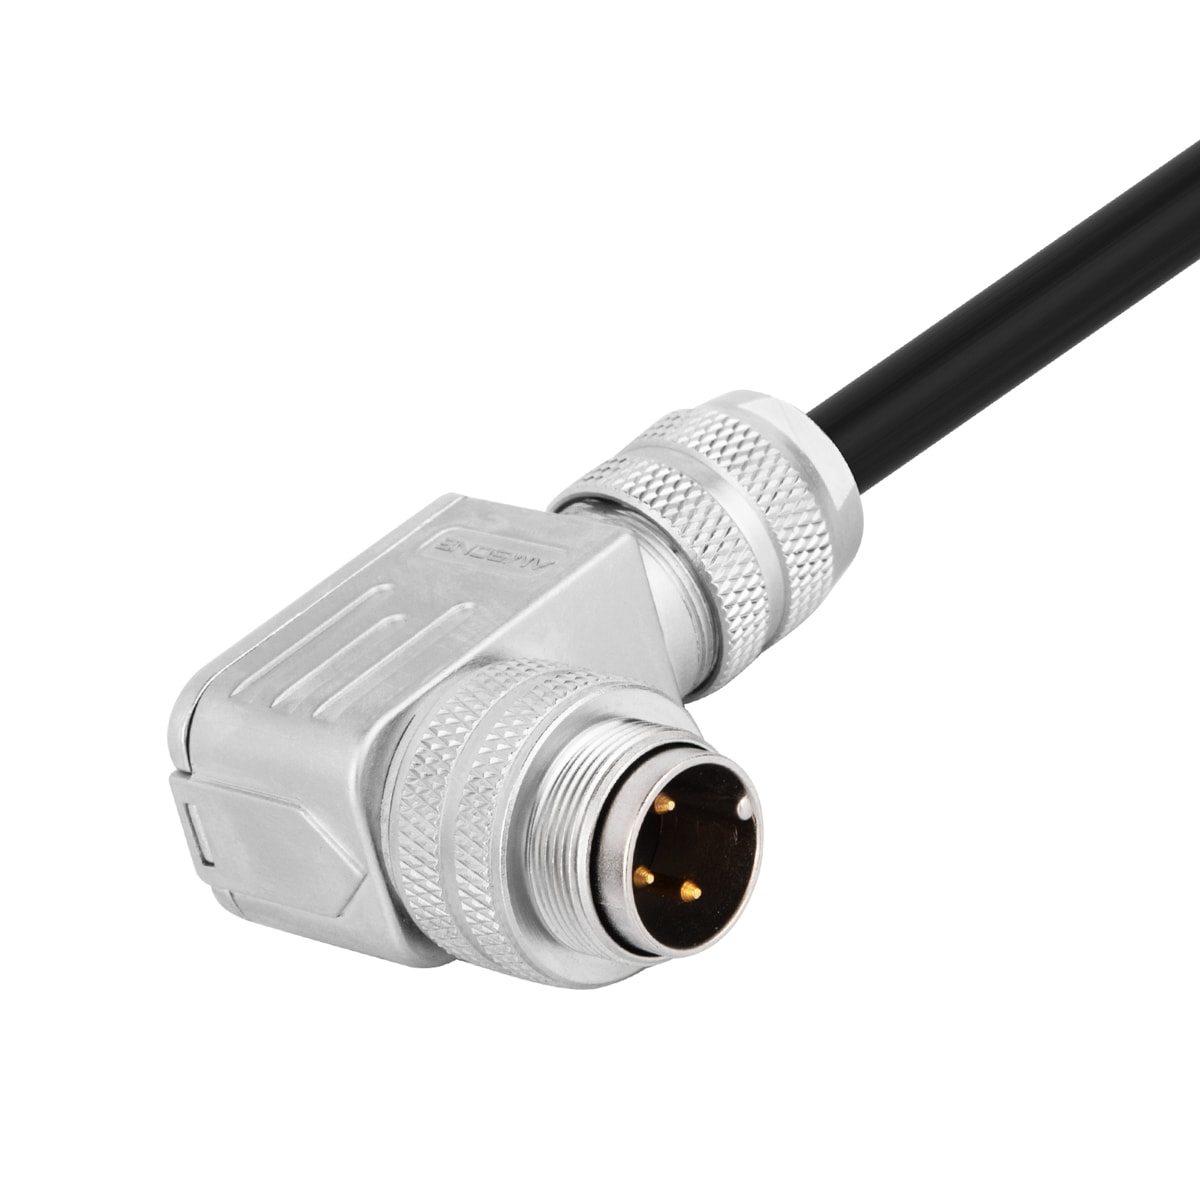 M16 cable connector,male,contacts:6,field assembly type,solder connection,right angled,IP67,UL certified